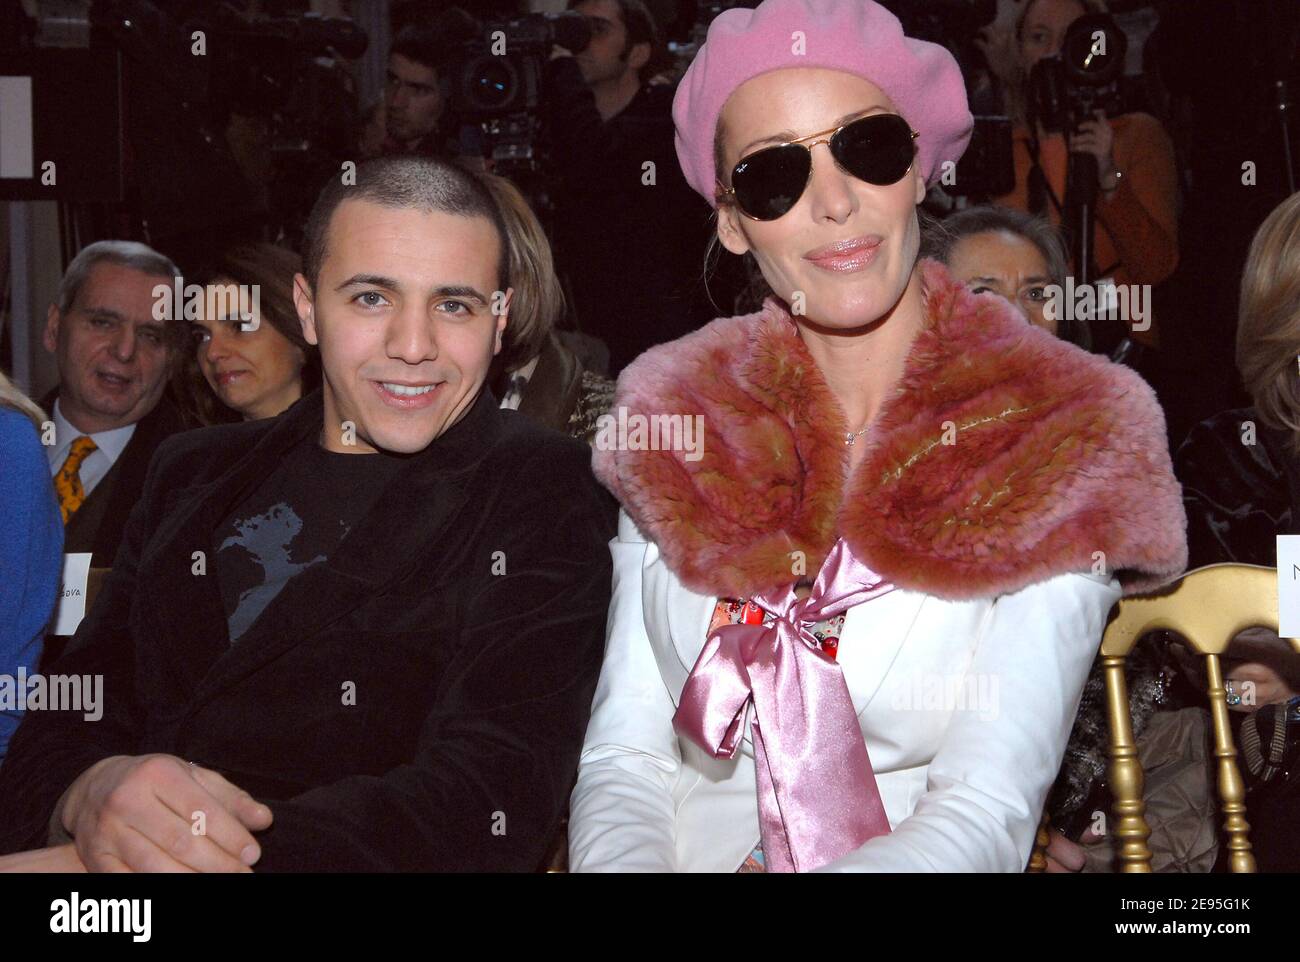 French singers Faudel and Ophelie Winter attend the Lebanese designer Elie Saab Haute-Couture Spring-Summer 2006, collection presentation held at 'L'Ecole Nationale des Beaux-Arts', in Paris, France, on January 25, 2006. Photo by Abd Rabbo-Taamallah/ABACAPRESS.COM Stock Photo